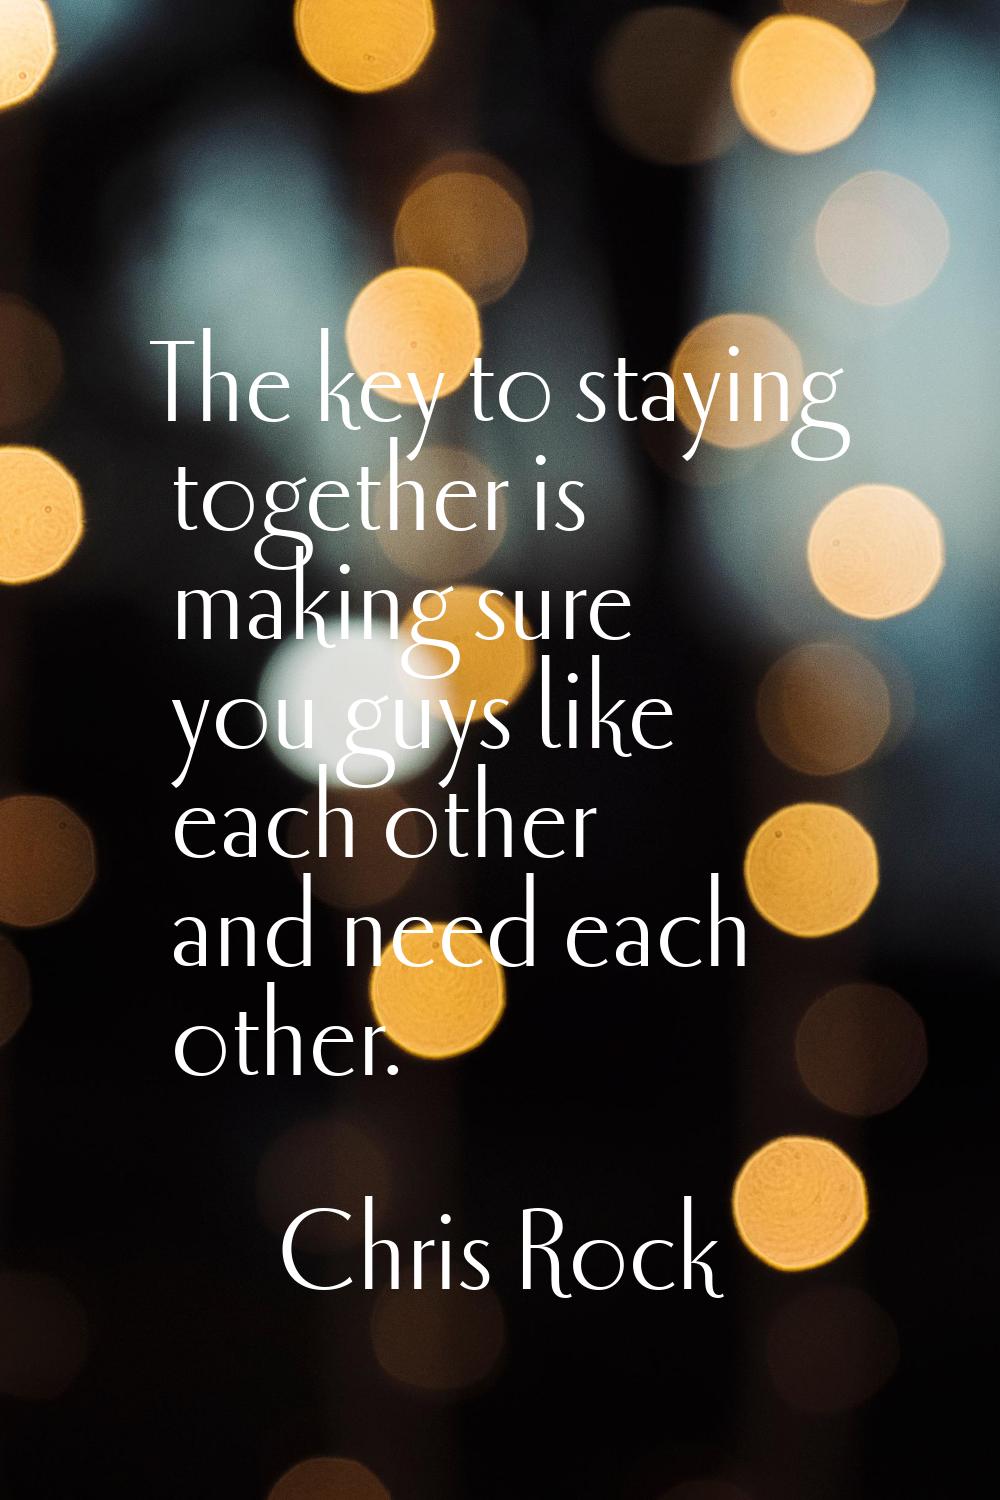 The key to staying together is making sure you guys like each other and need each other.